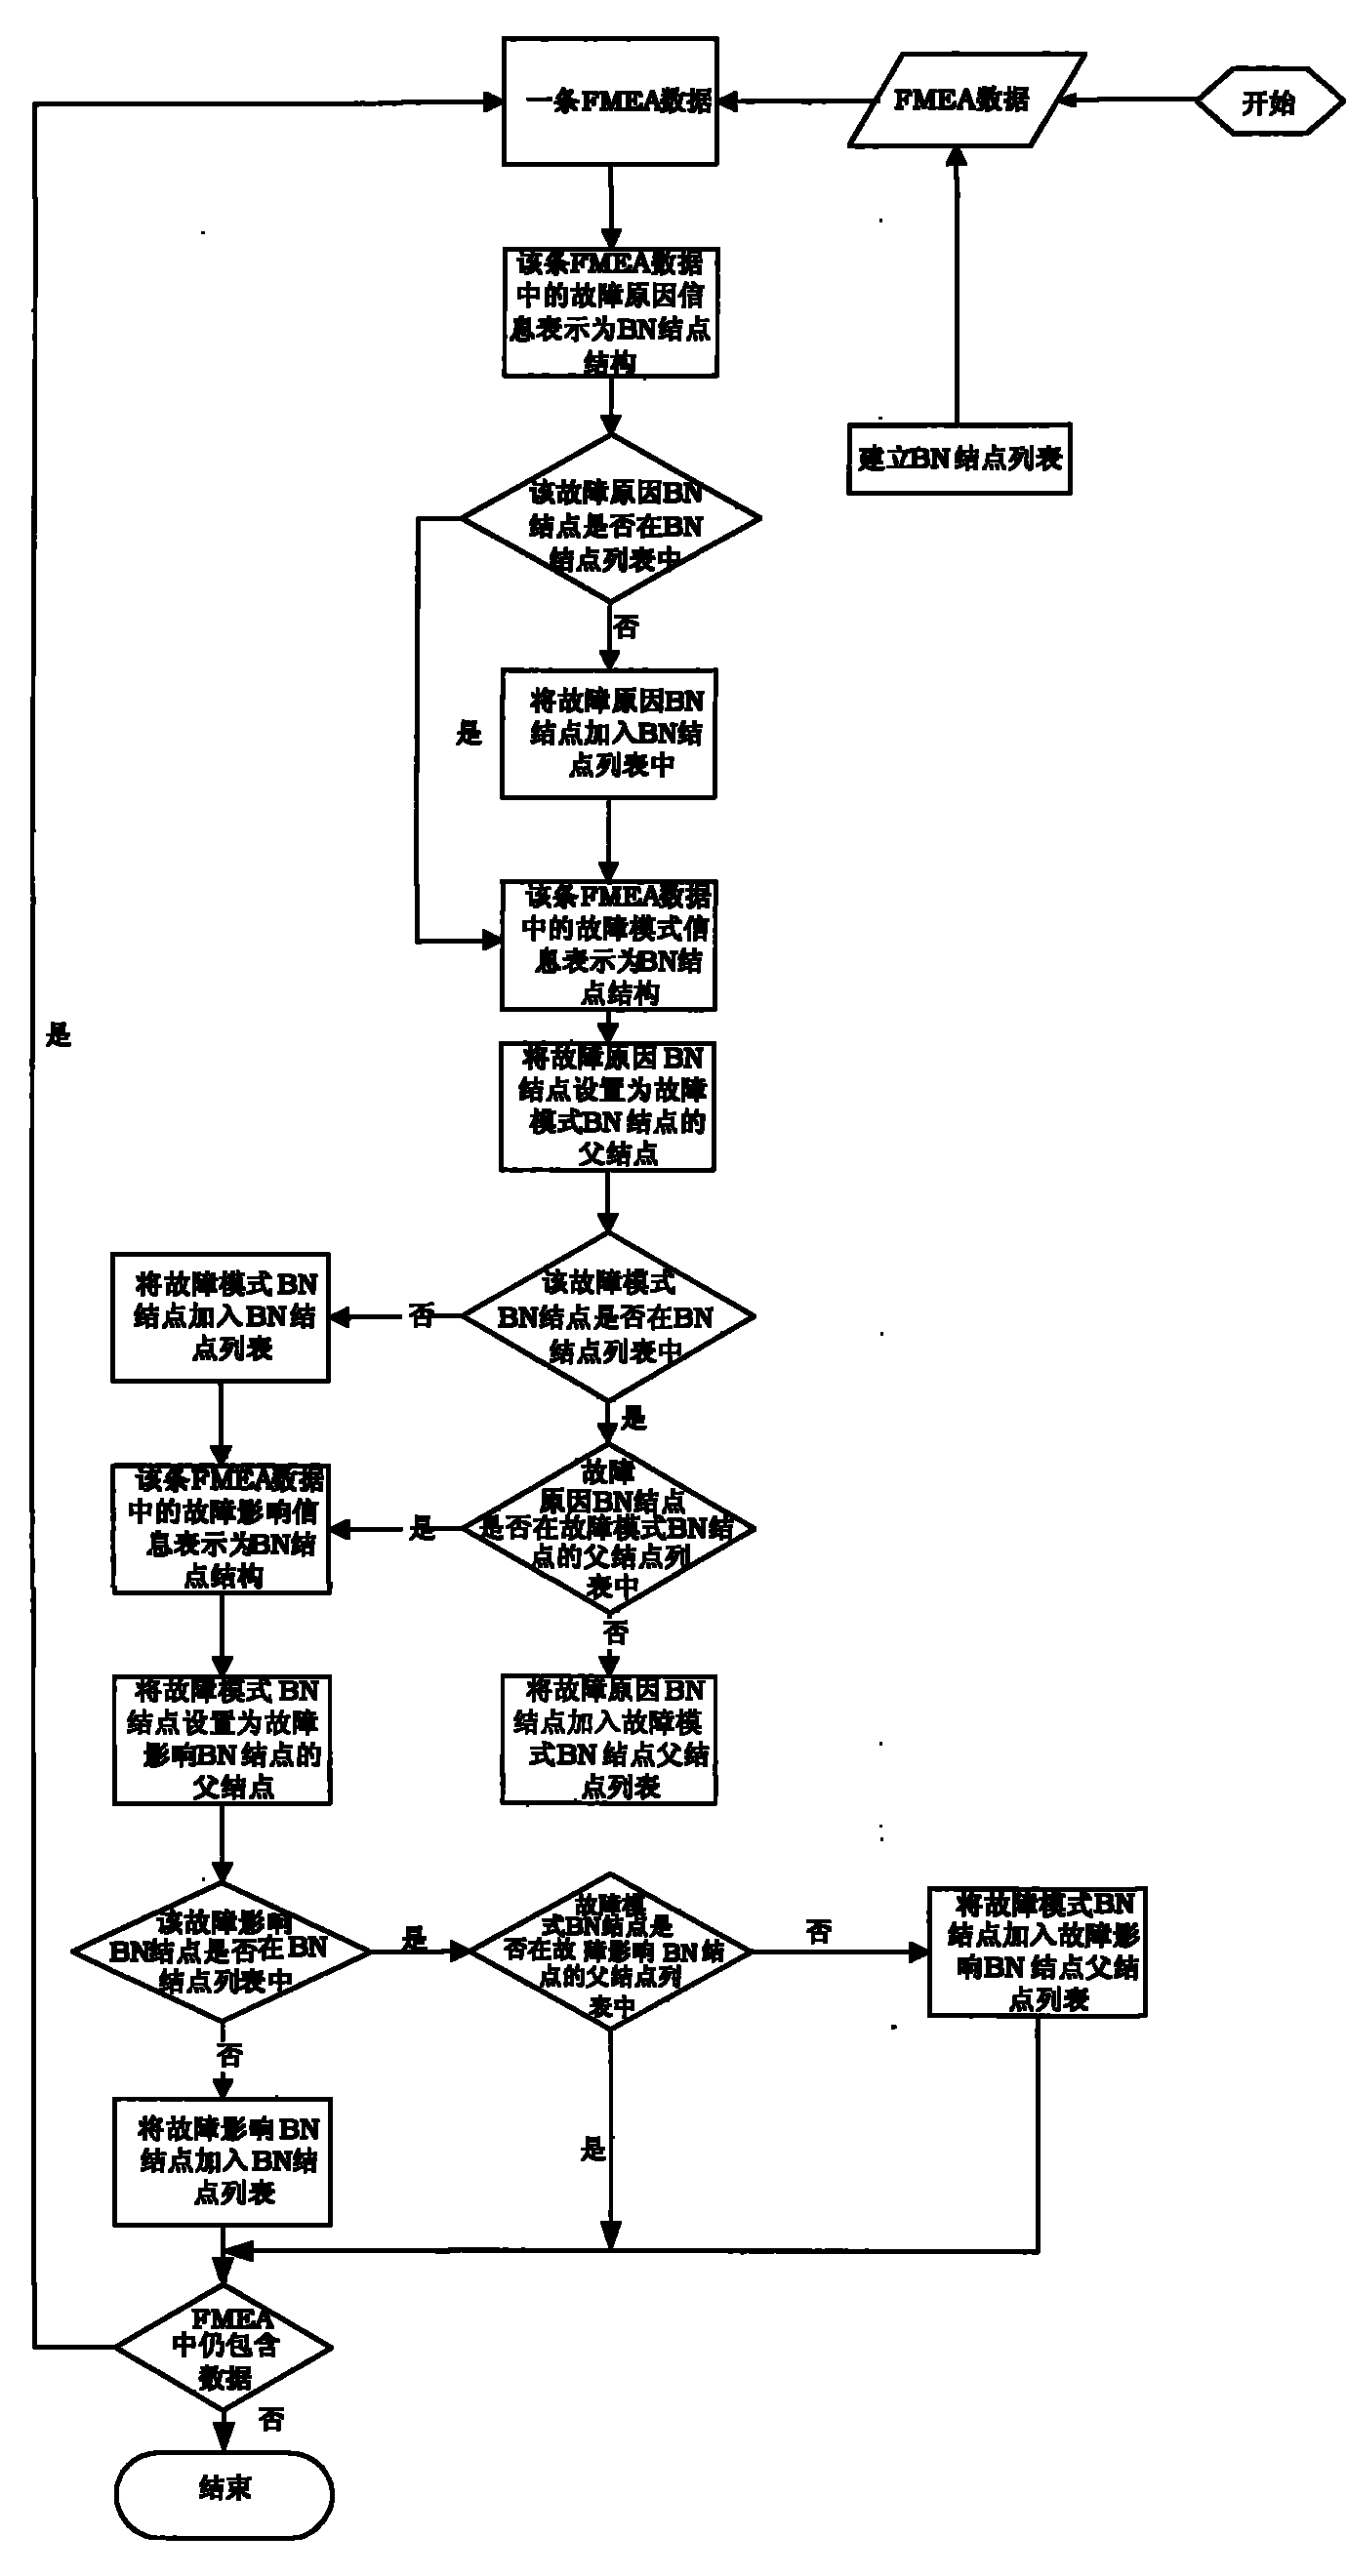 Method for performing fault diagnosis by using model conversion